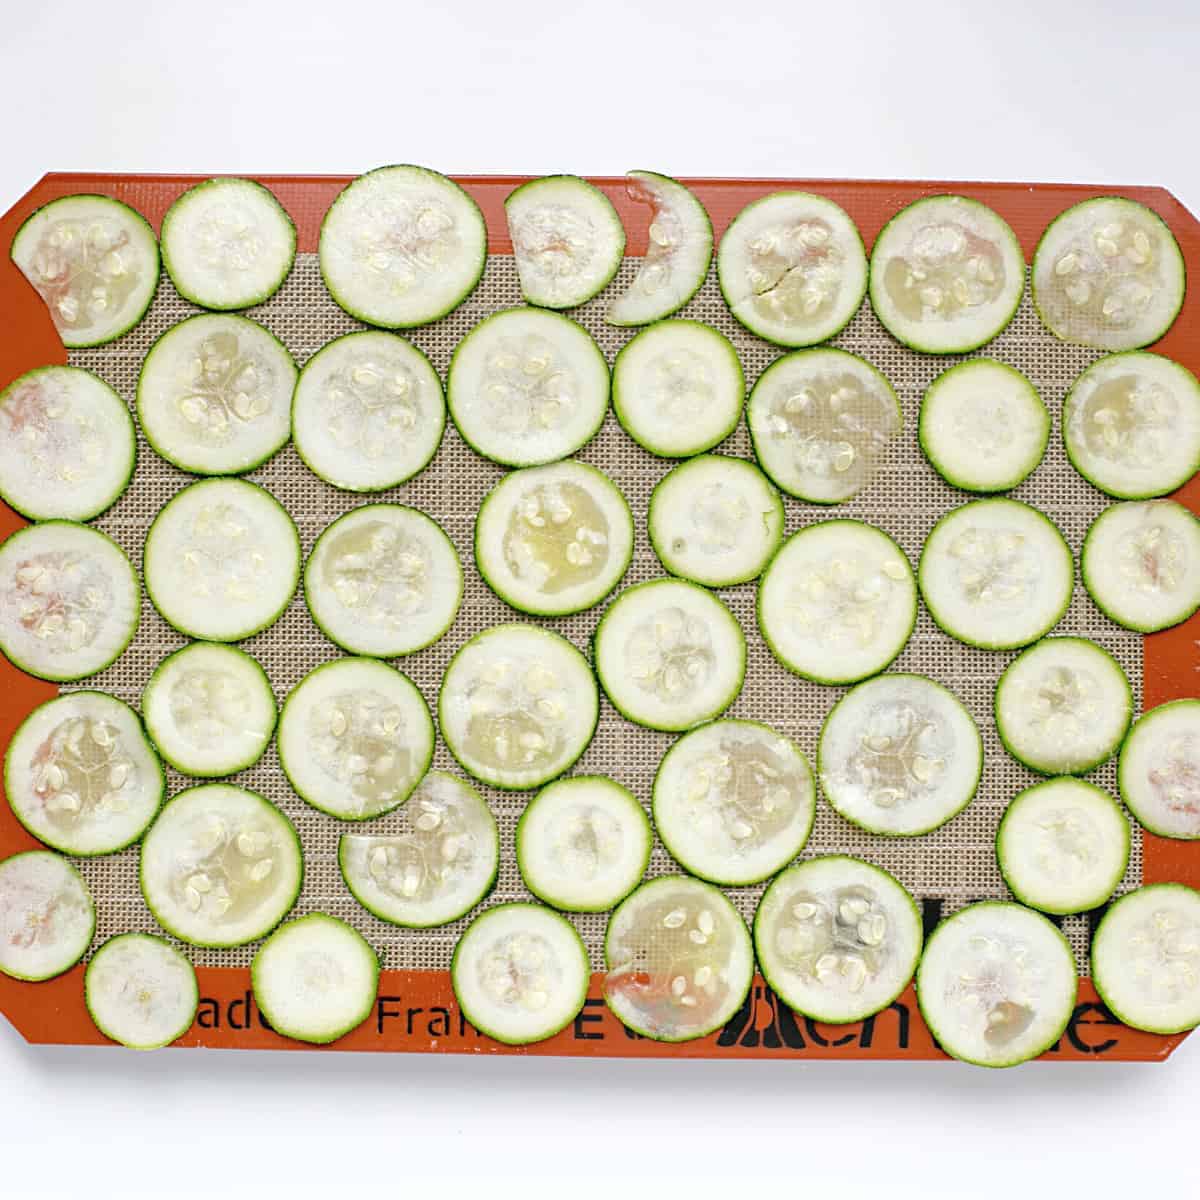 unbaked zucchini slices on lined baking sheet.